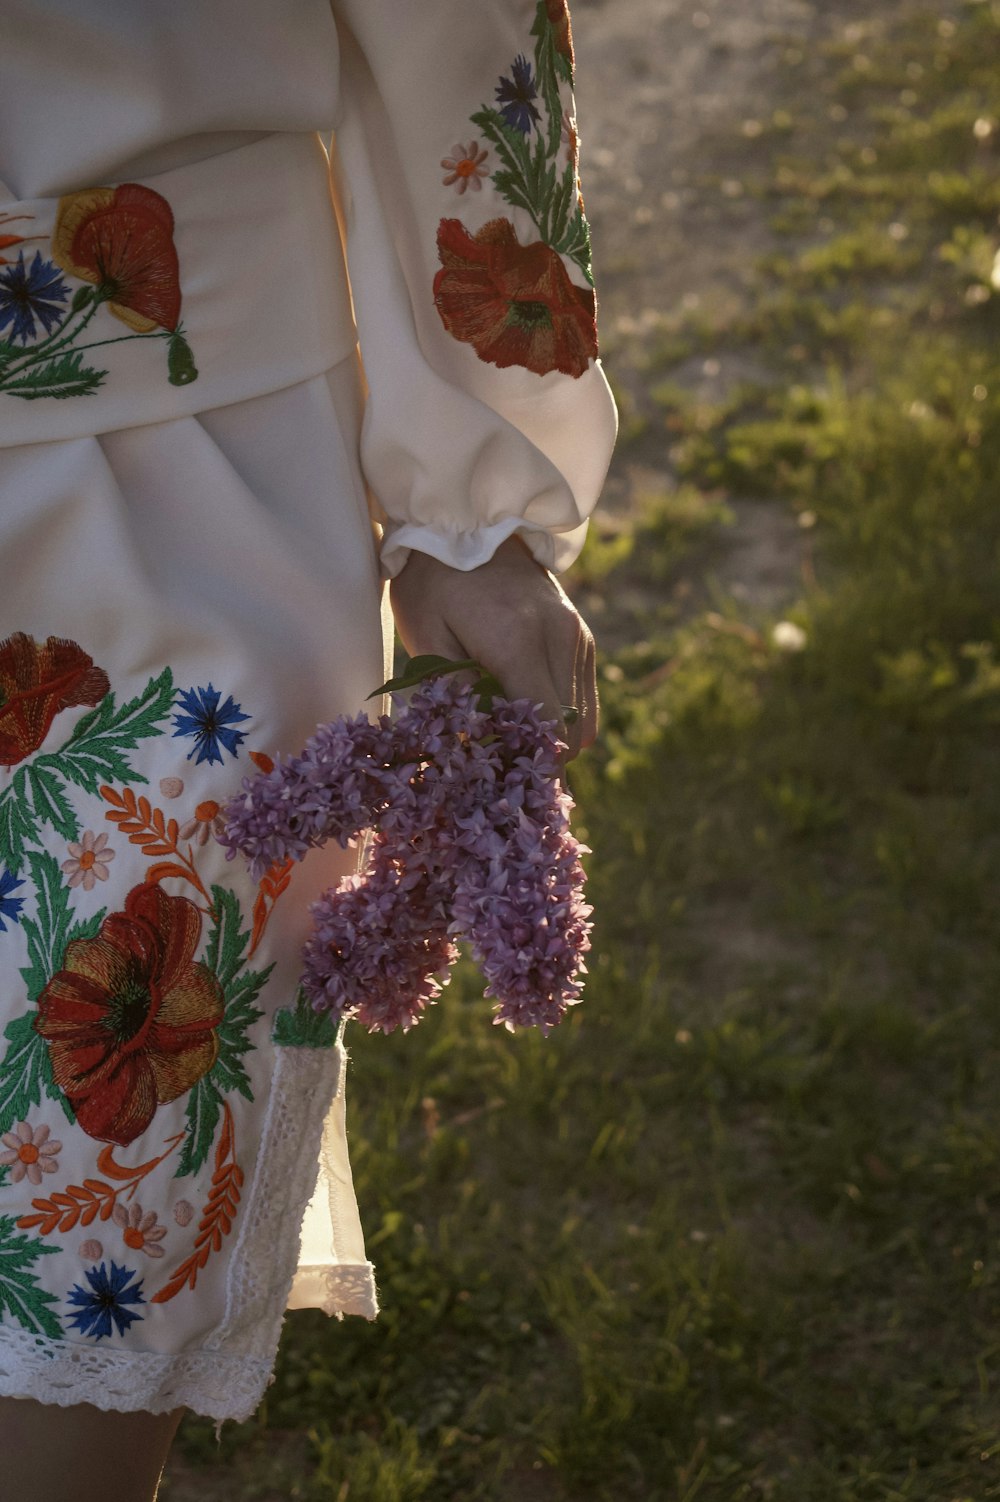 a person wearing a white dress with flowers on it